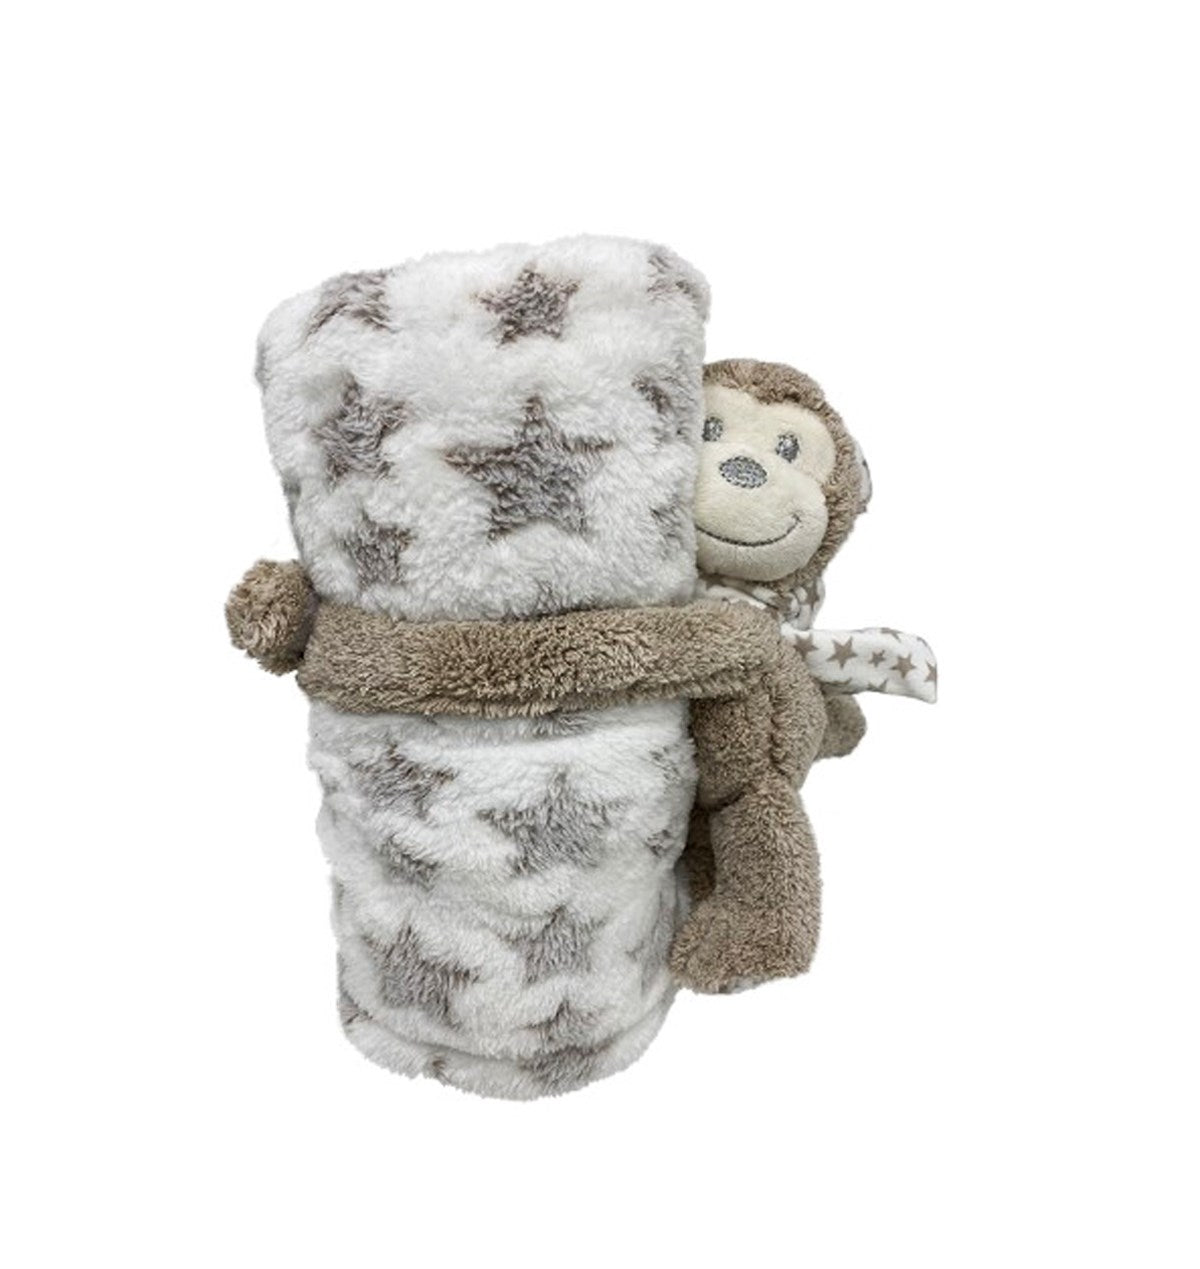 Child's Throw and Plush Toy